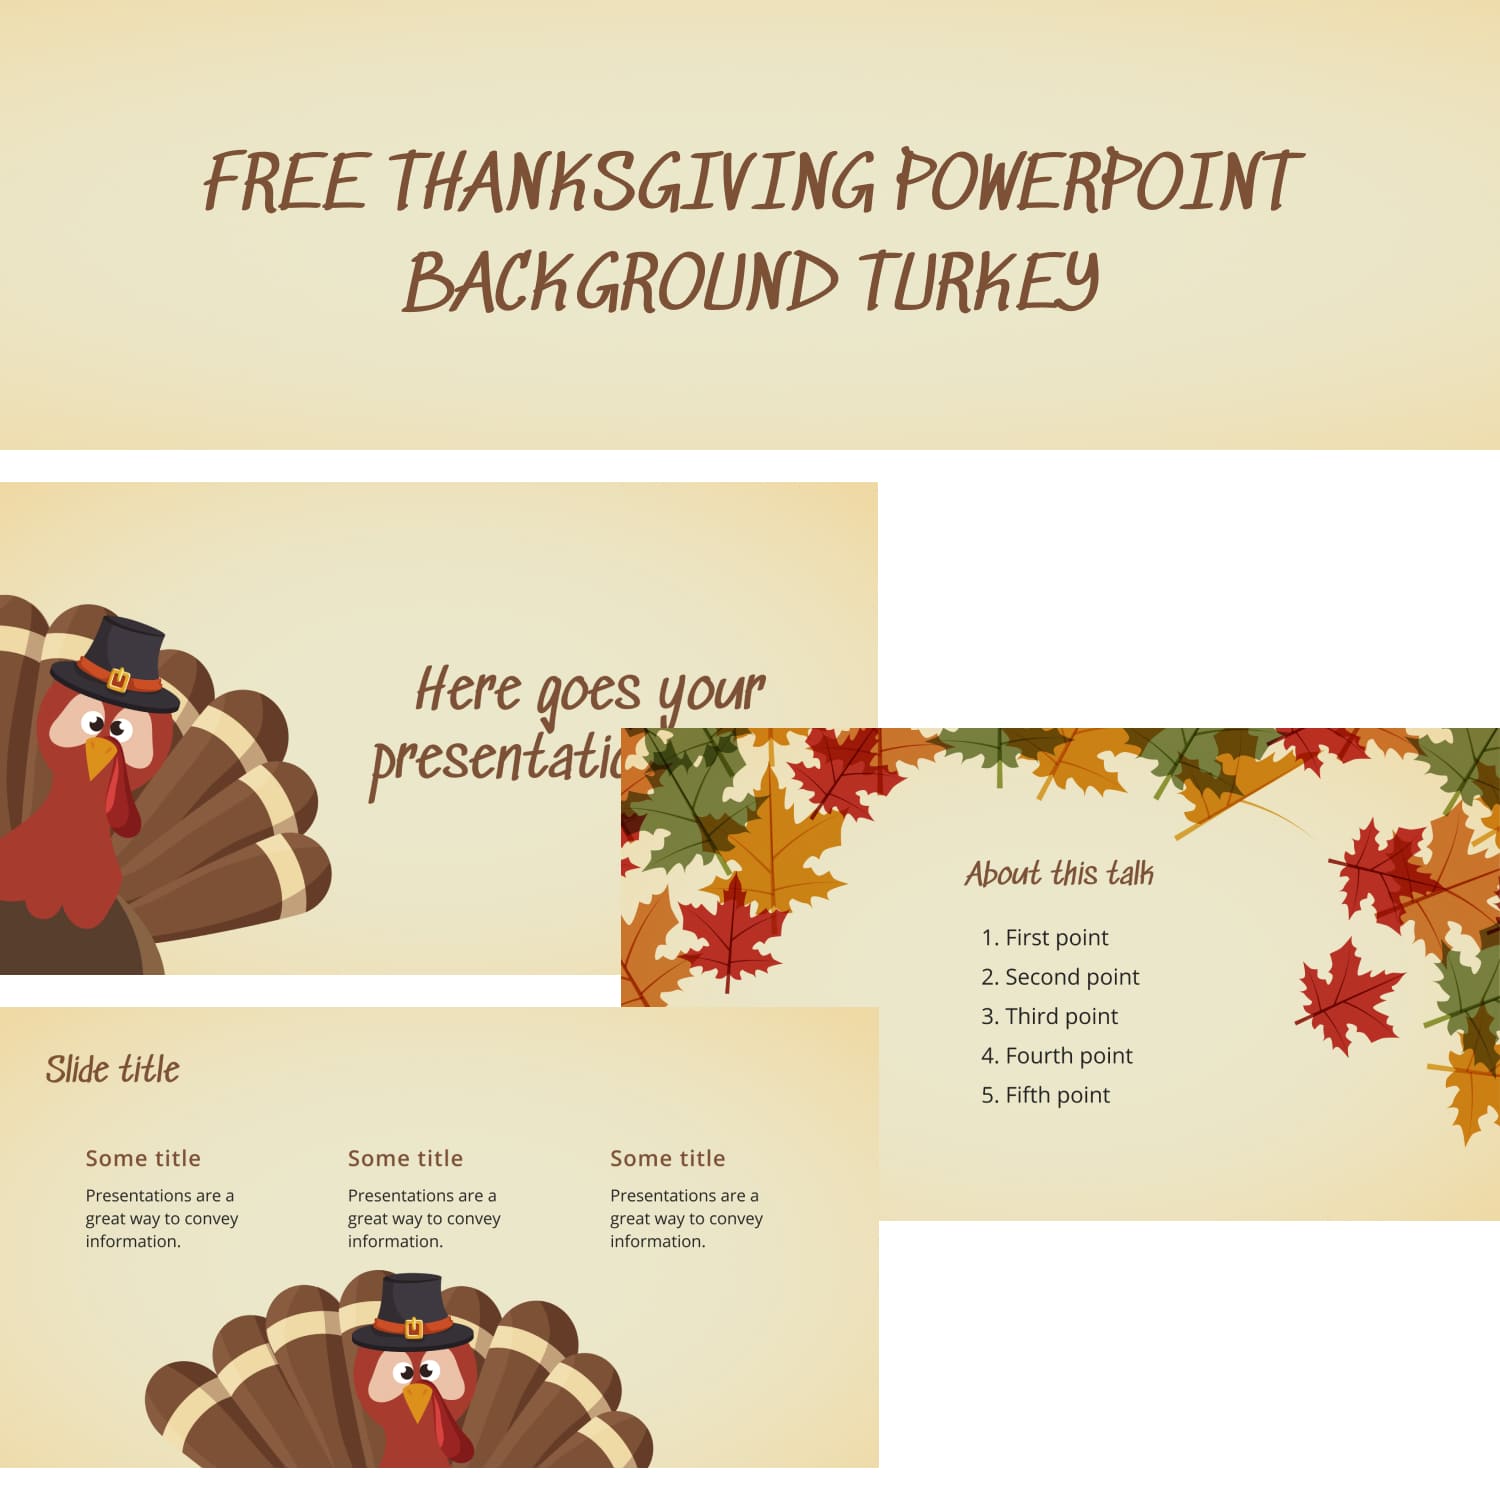 11 Preview Free Thanksgiving Powerpoint Background Turkey 1500x1500 2.